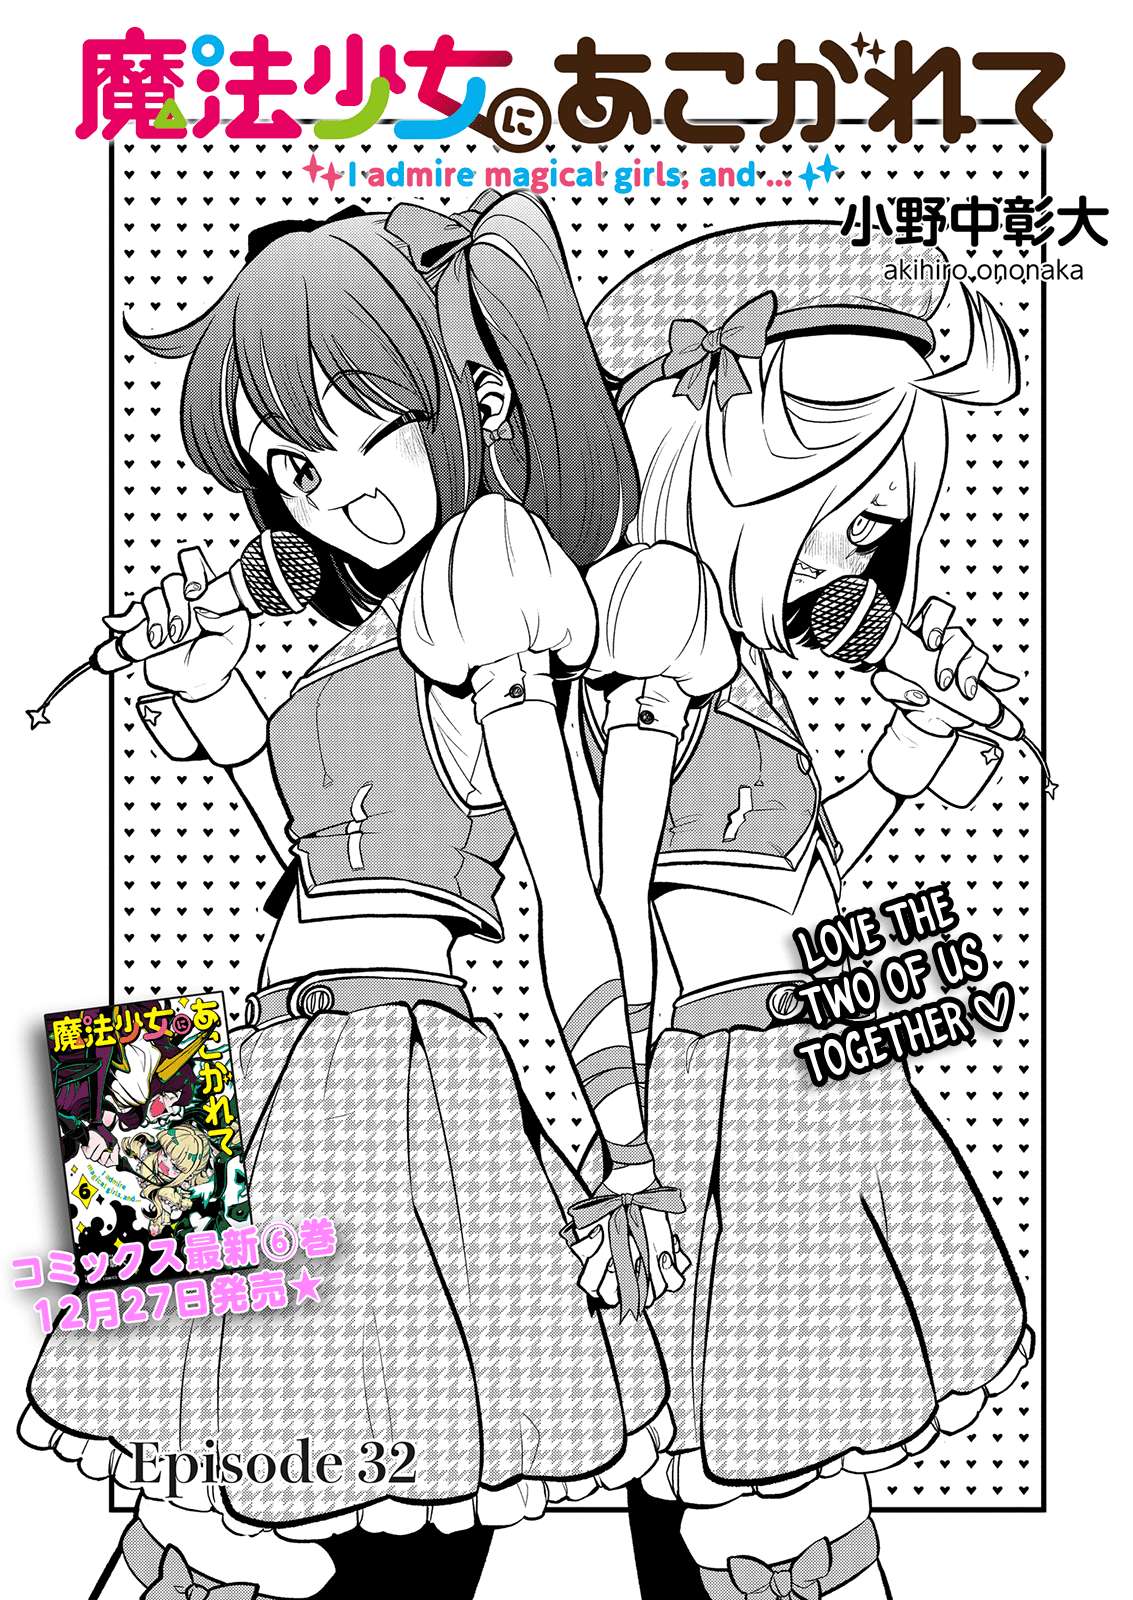 Gushing over Magical Girls - chapter 32 - #3